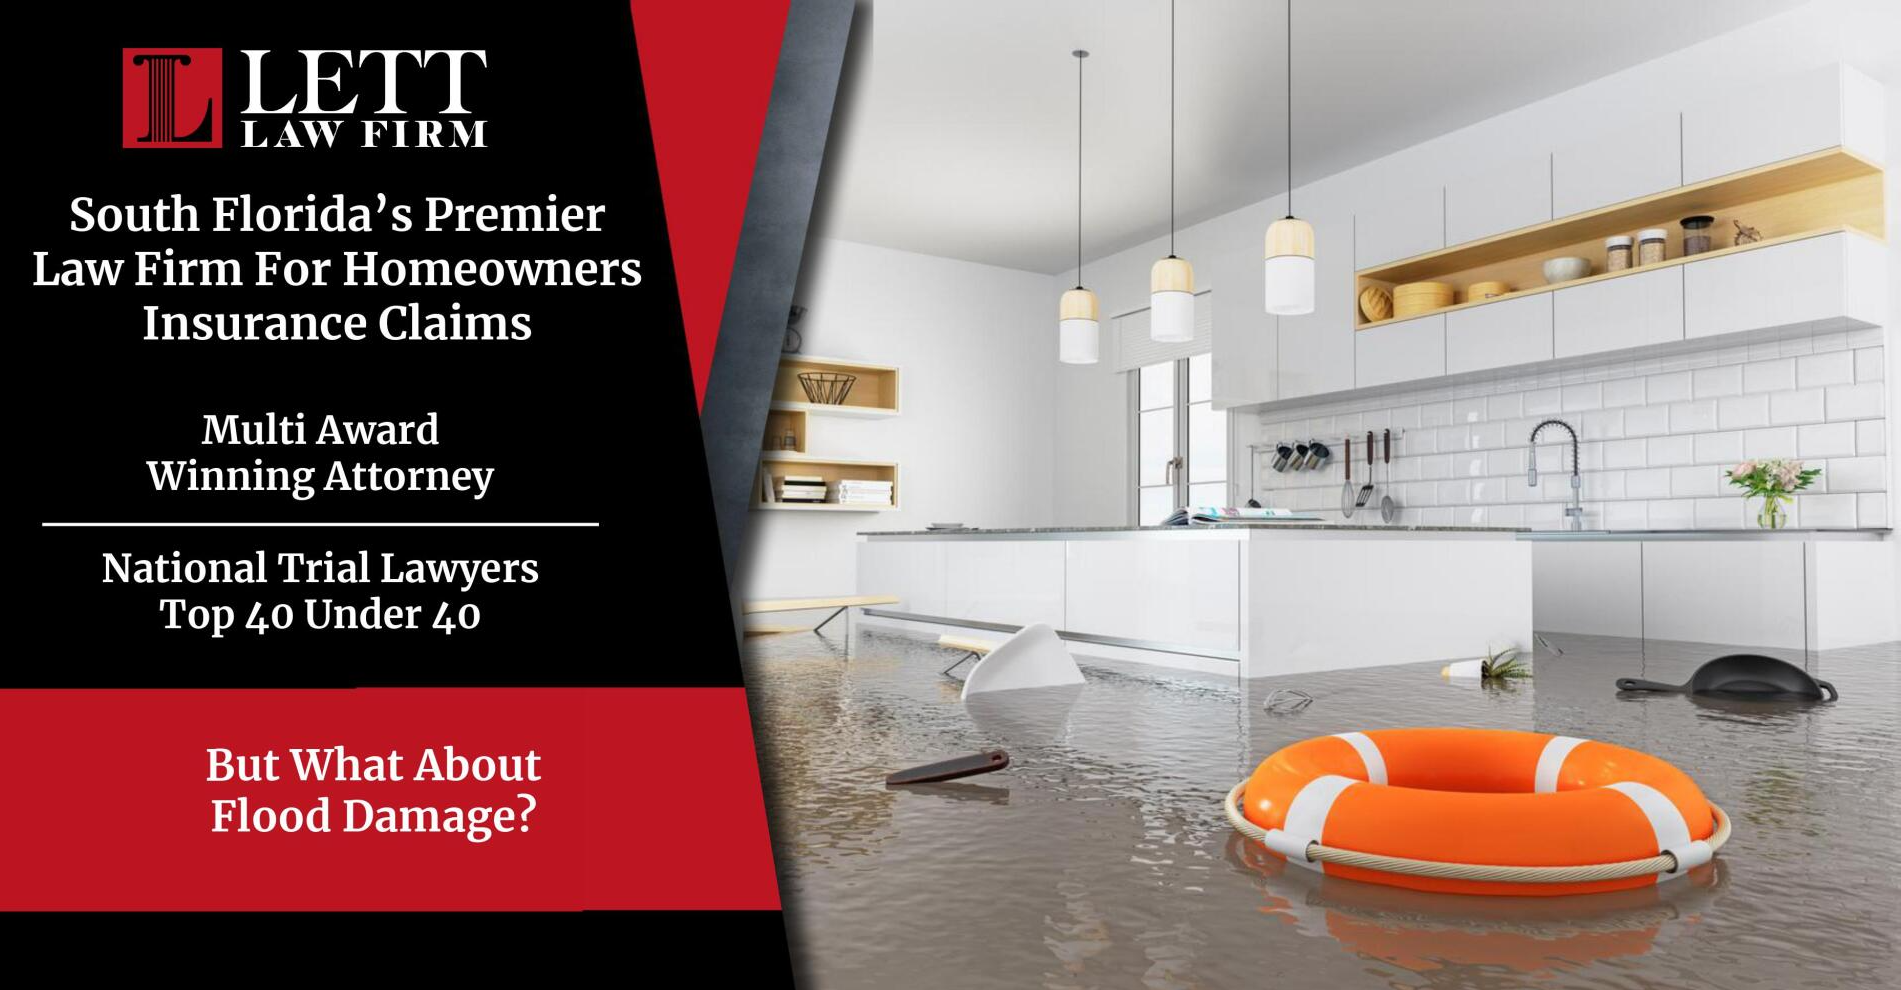 Miami Homeowners Insurance Lawyer - But What About Flood Damage?